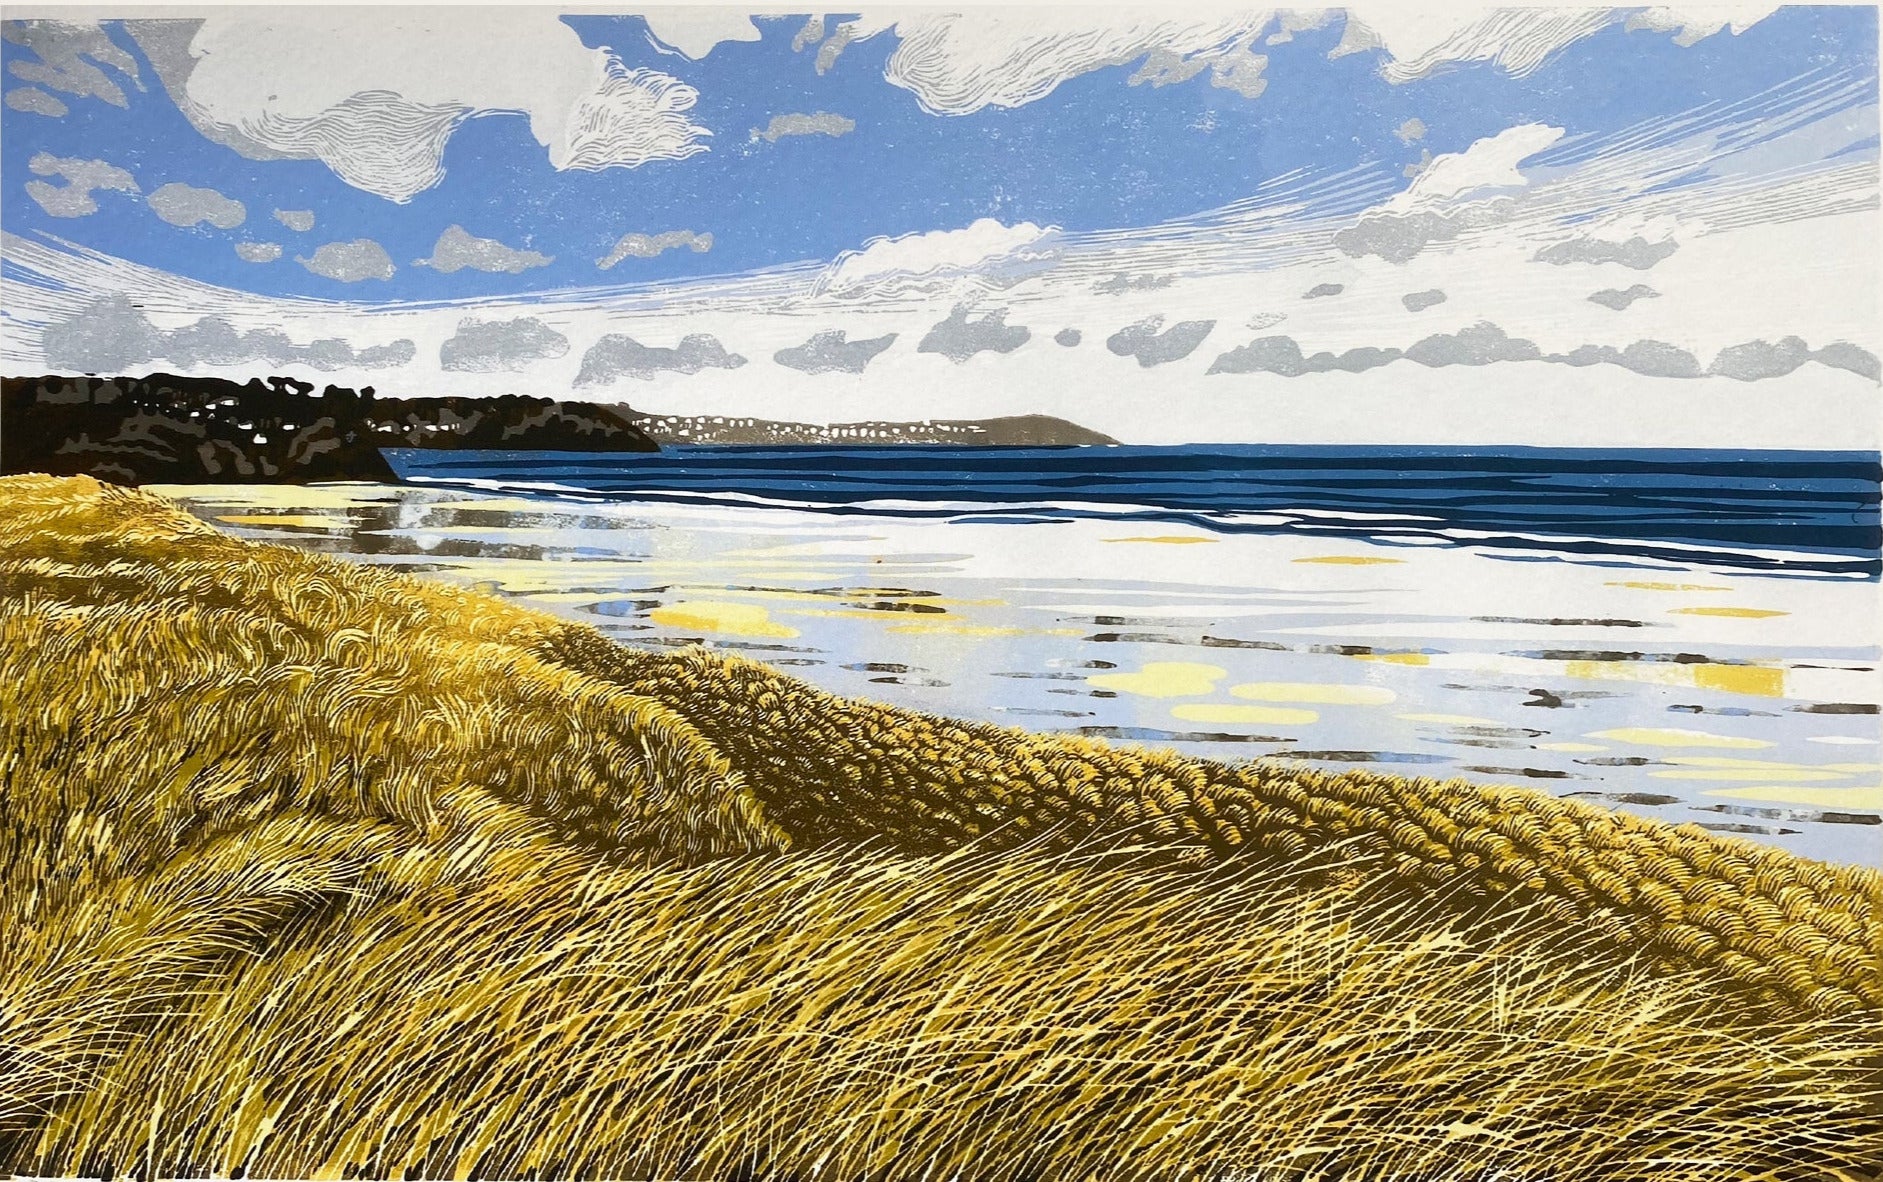 Looking from the sand dunes covered in their long sharp grasses across the wet reflective sandy beach of porth kidney at lelant towards St Ives. North coast Cornwall. A4 size art print from an original limited edition reduction linocut print